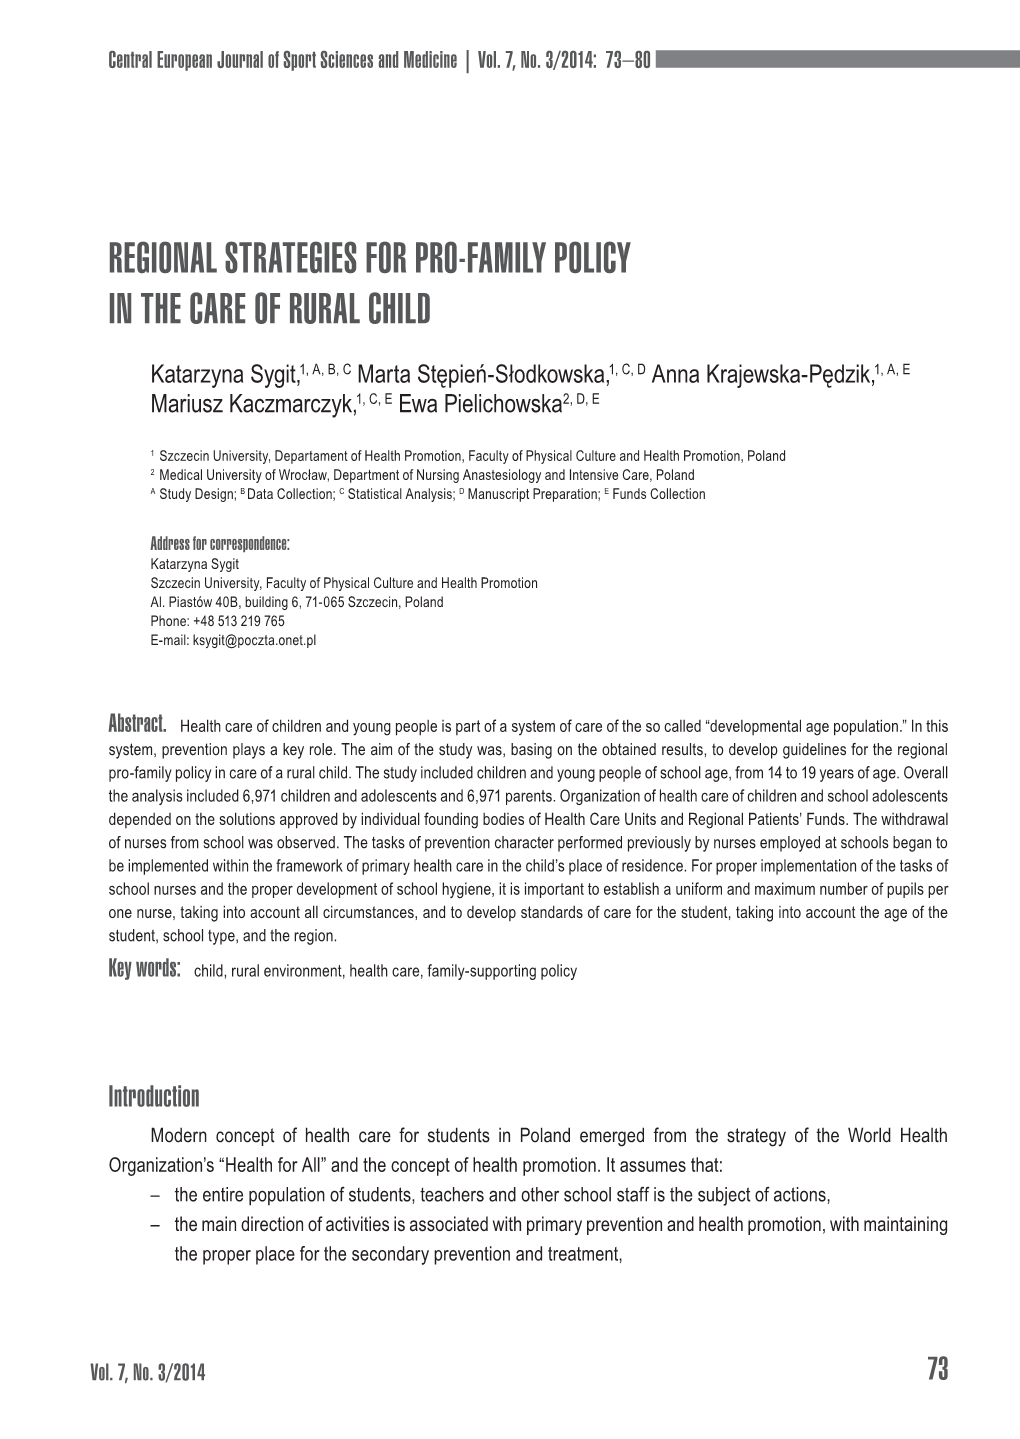 Regional Strategies for Pro-Family Policy in the Care of Rural Child